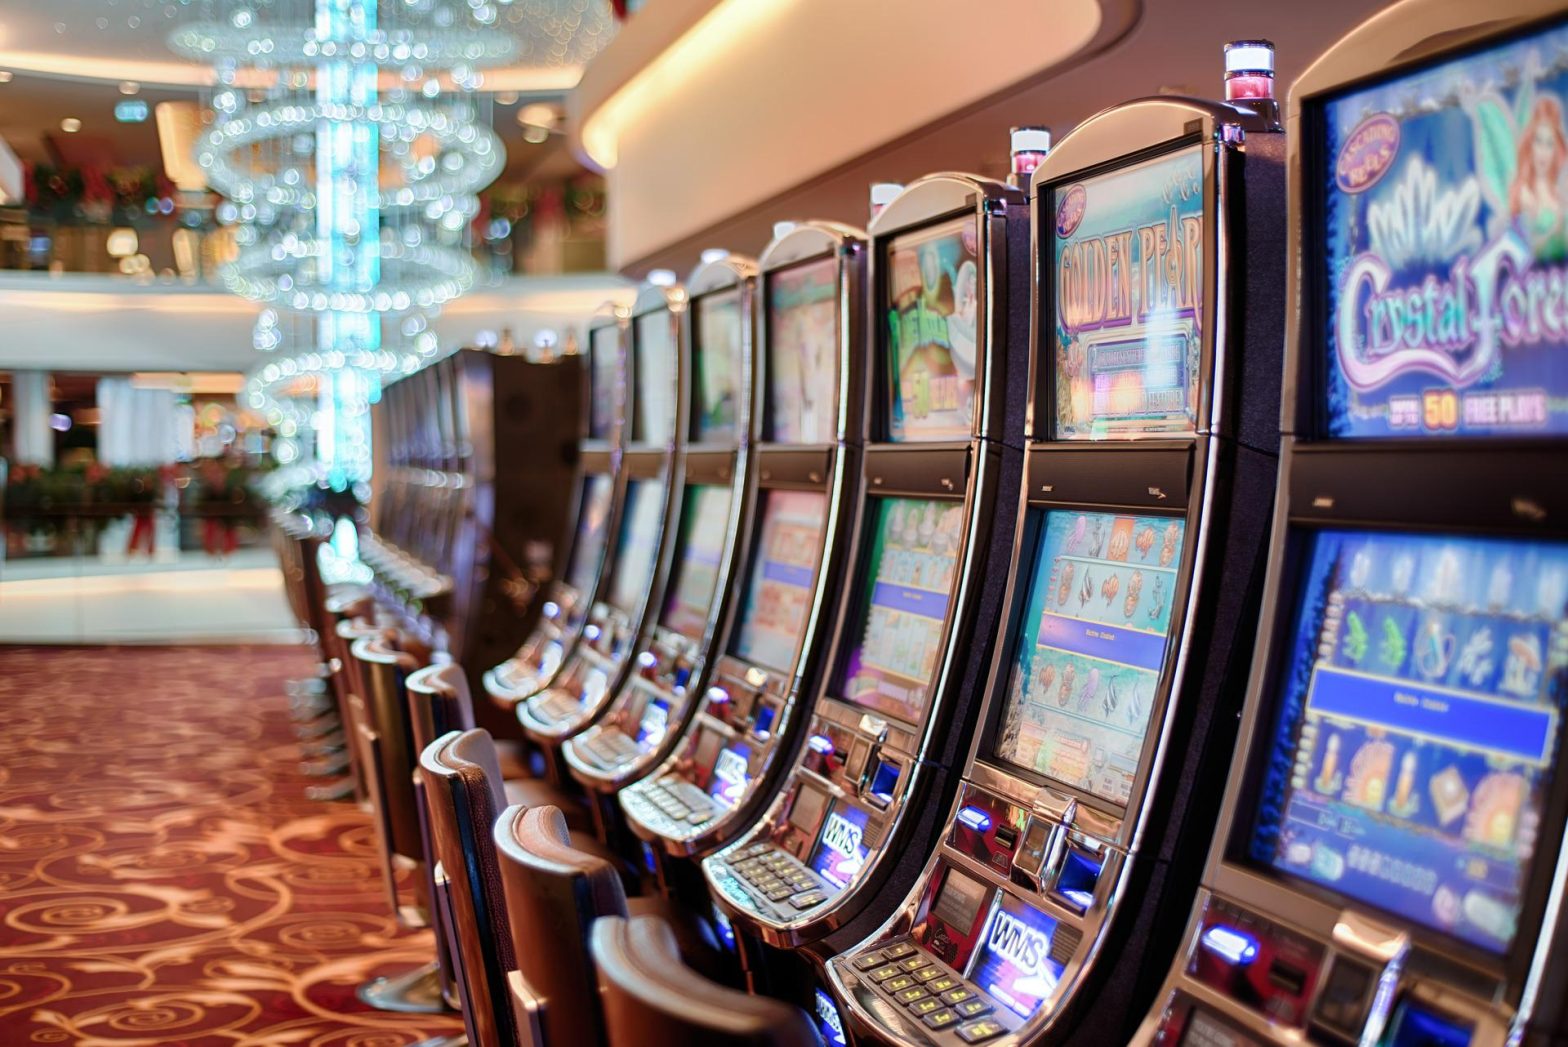 Slot Machine Cheats: tips for winning at online and bar slots